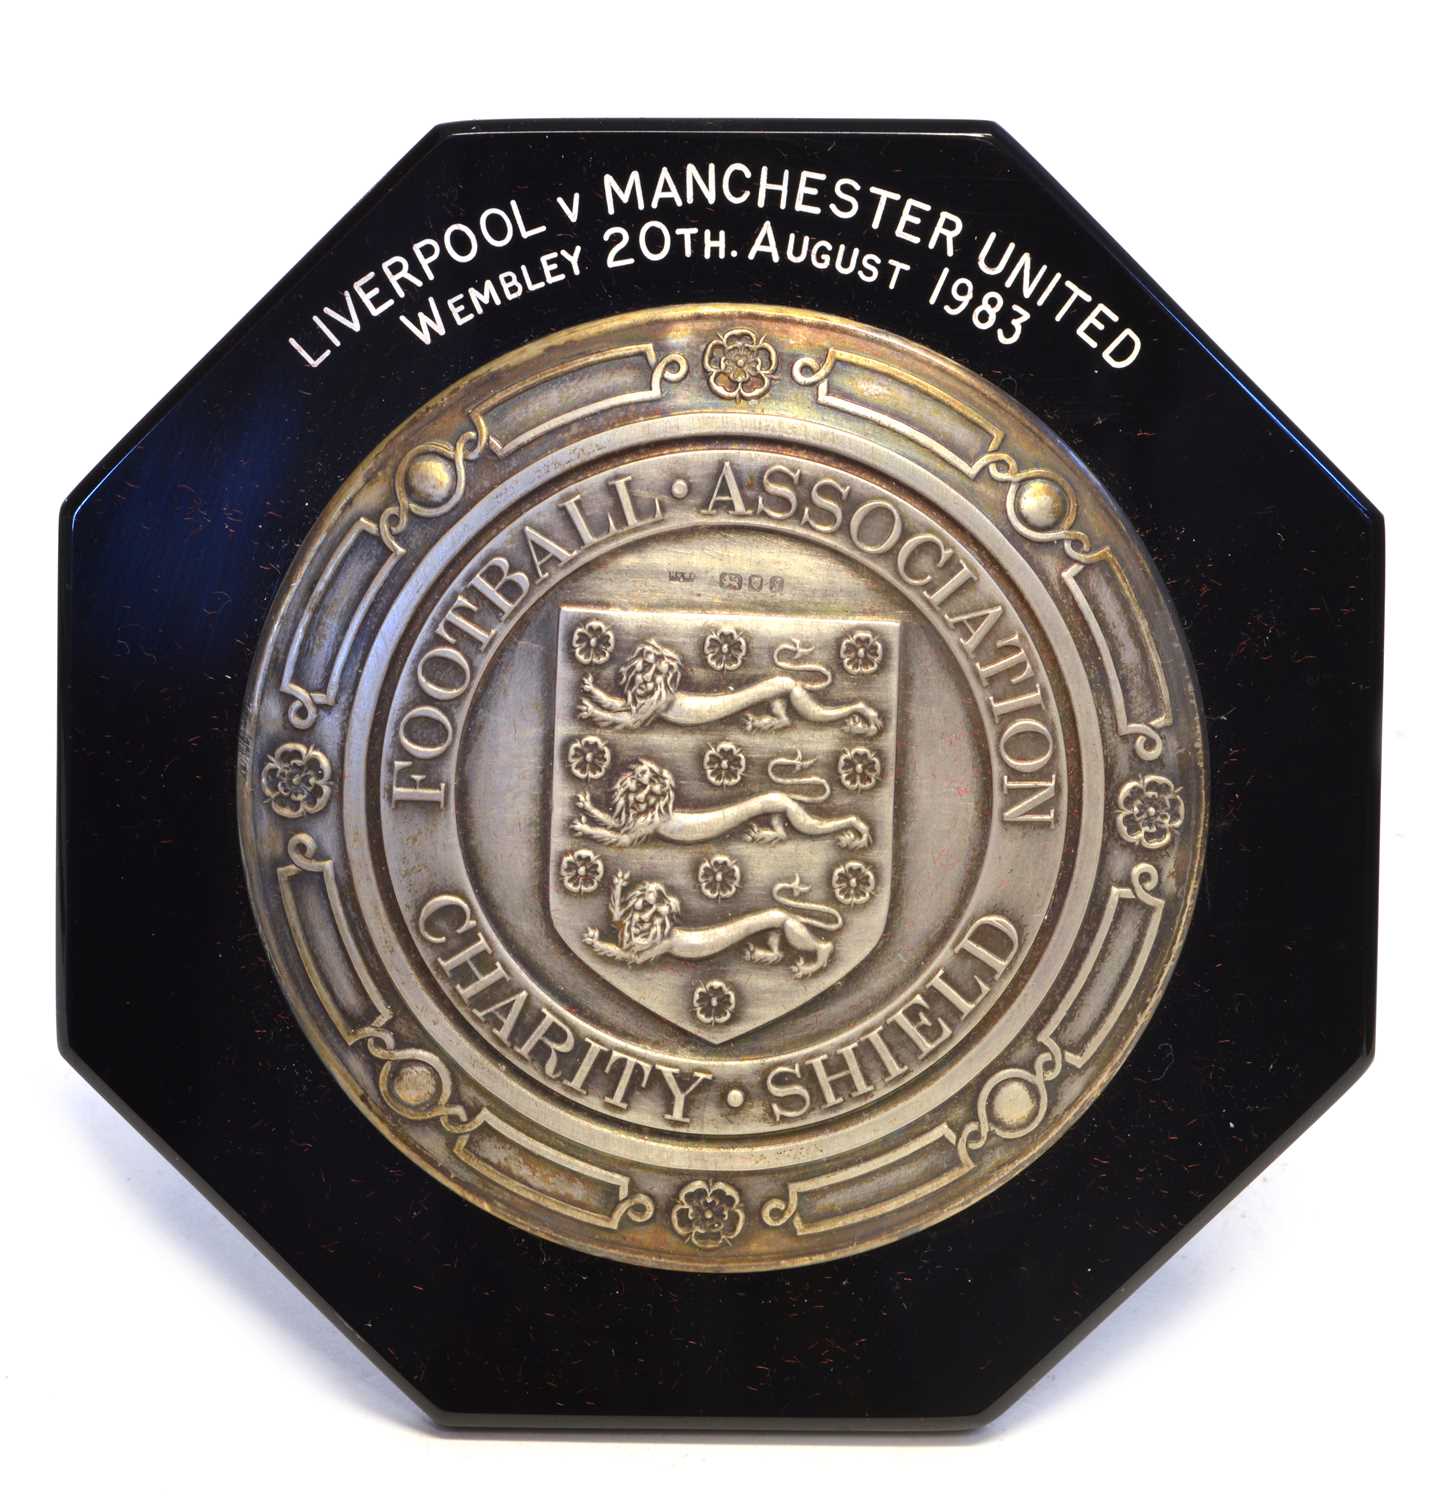 1 - FA Charity Shield silver plaque by Mappin & Webb